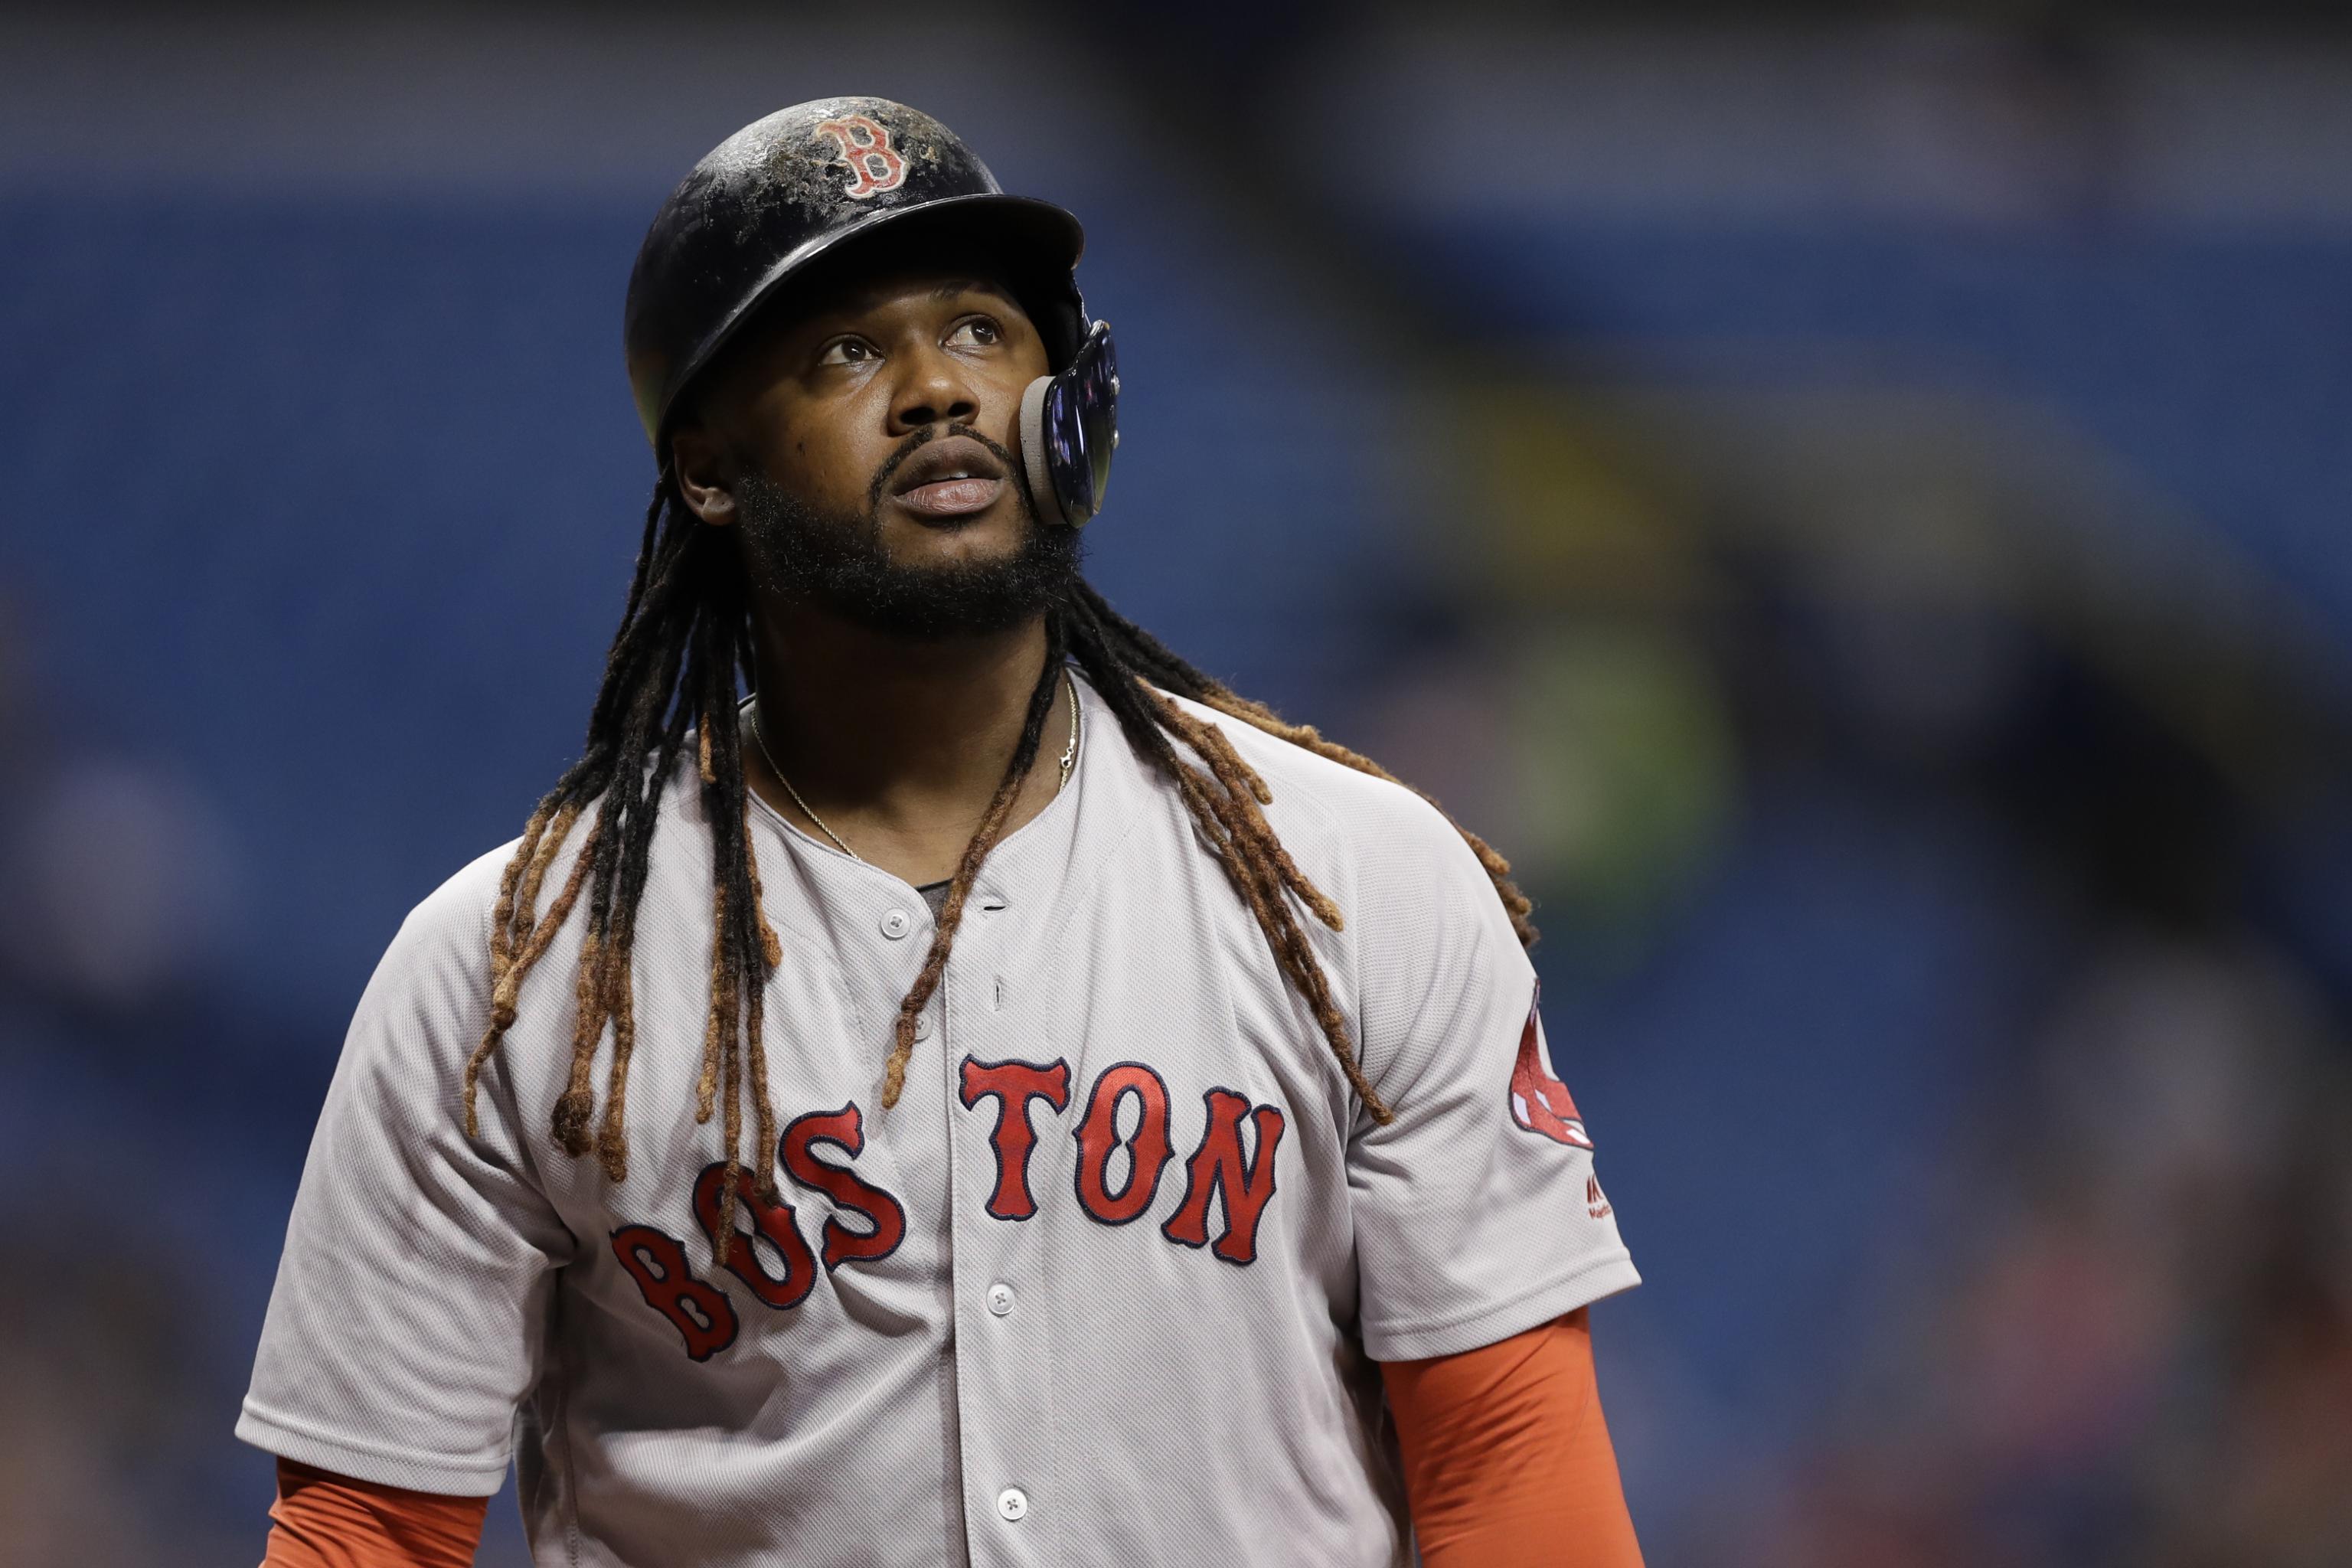 Let's take a visual journey through Hanley Ramirez's return to the Red Sox